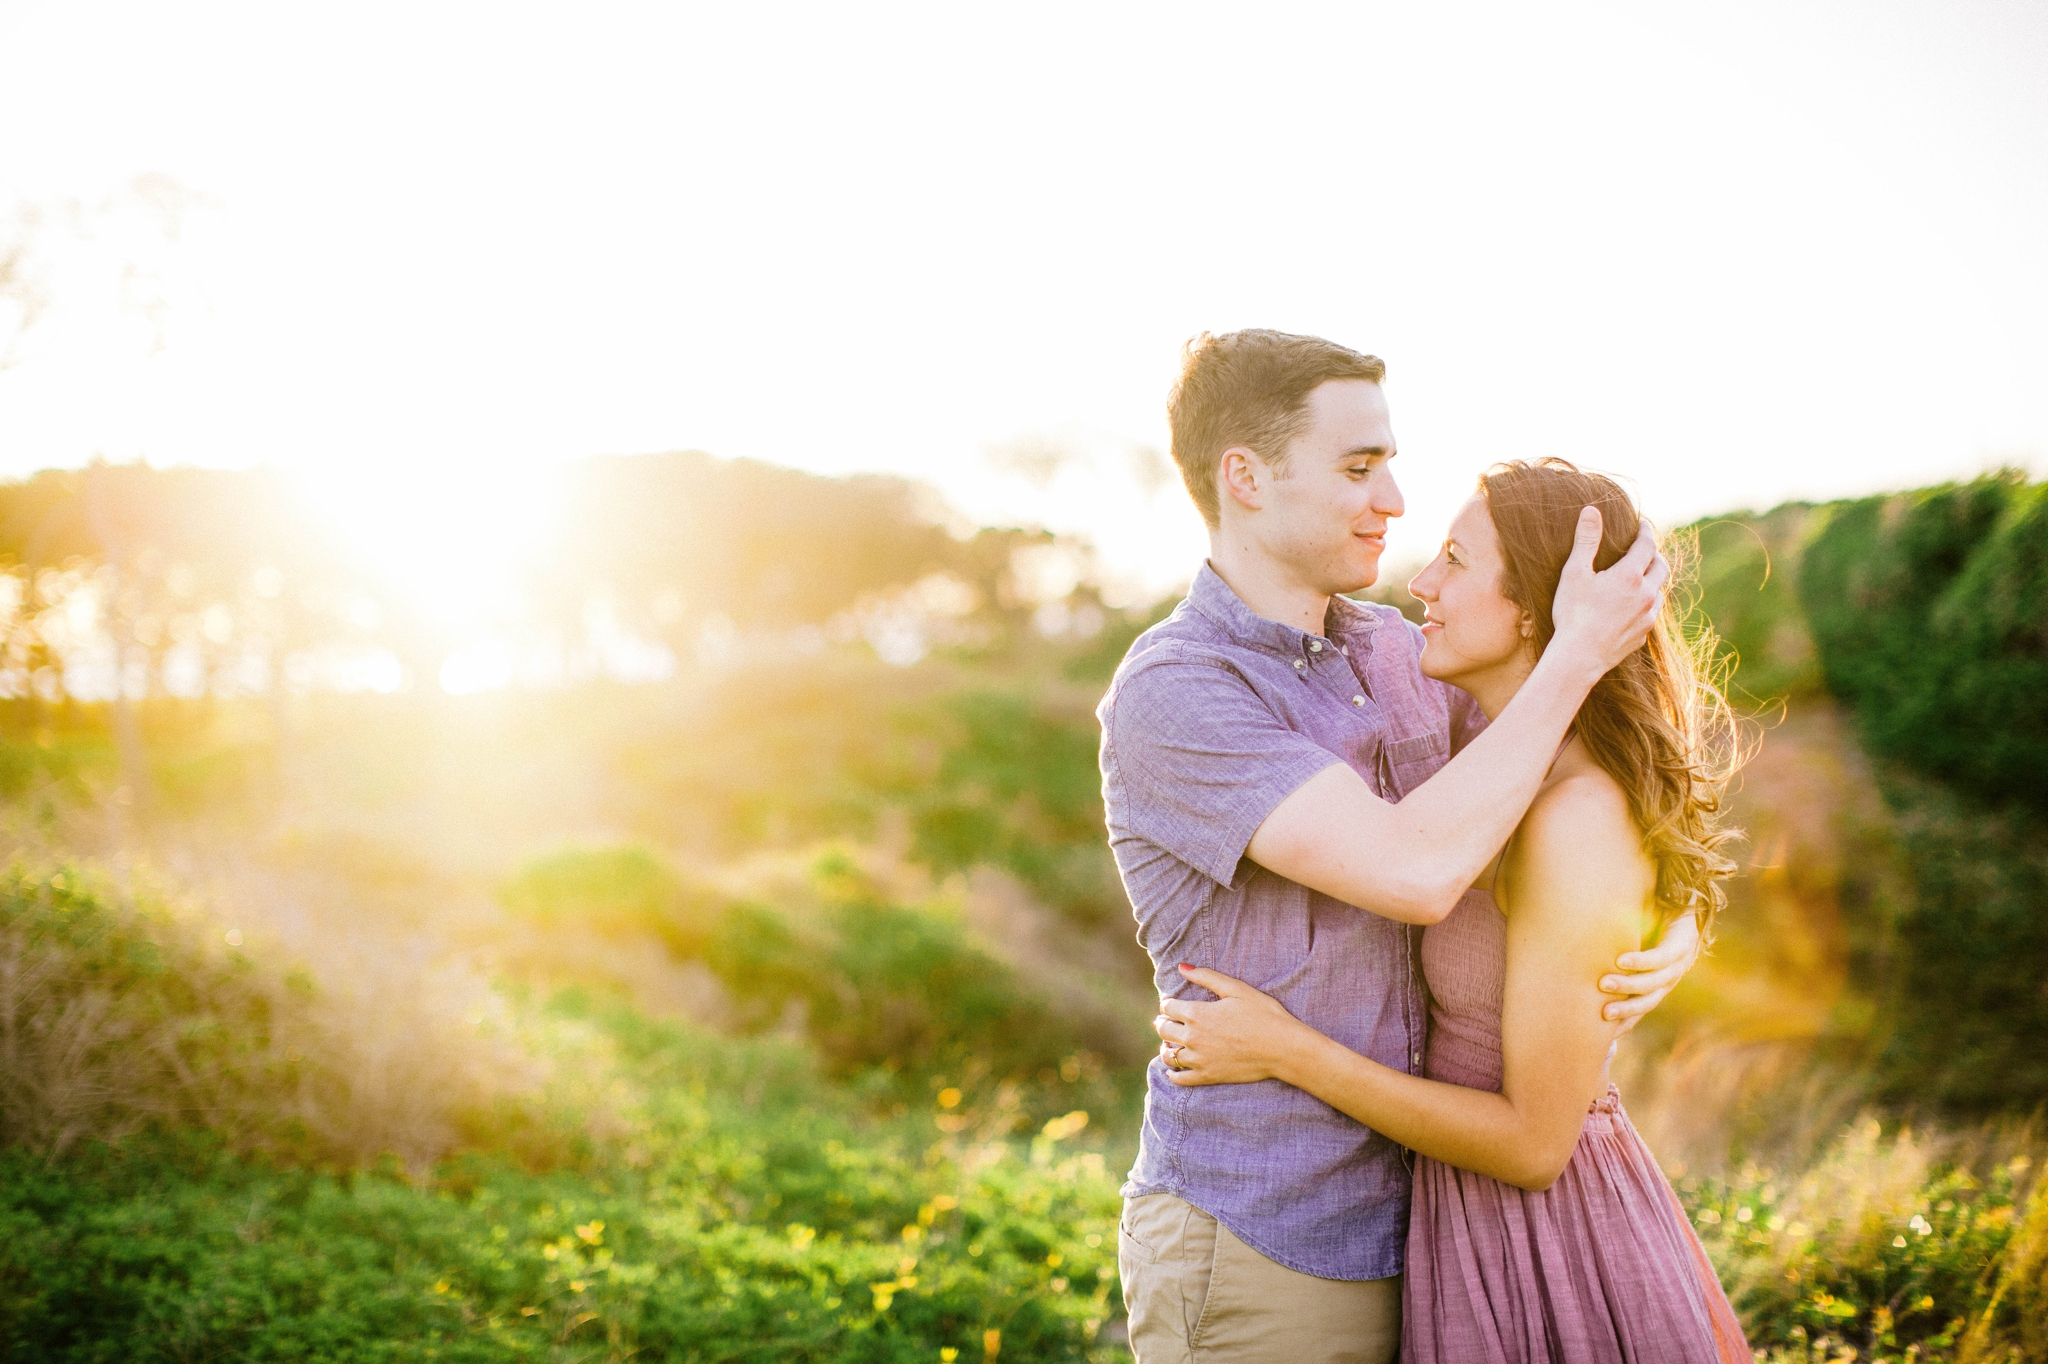  couple looking at each other while his hand is in her hair - in front of lush green dunes and hills with the sunset behind them - Woman is in a flowy pastel maxi dress - outdoor golden light session - engagement photographer in honolulu, oahu, hawai